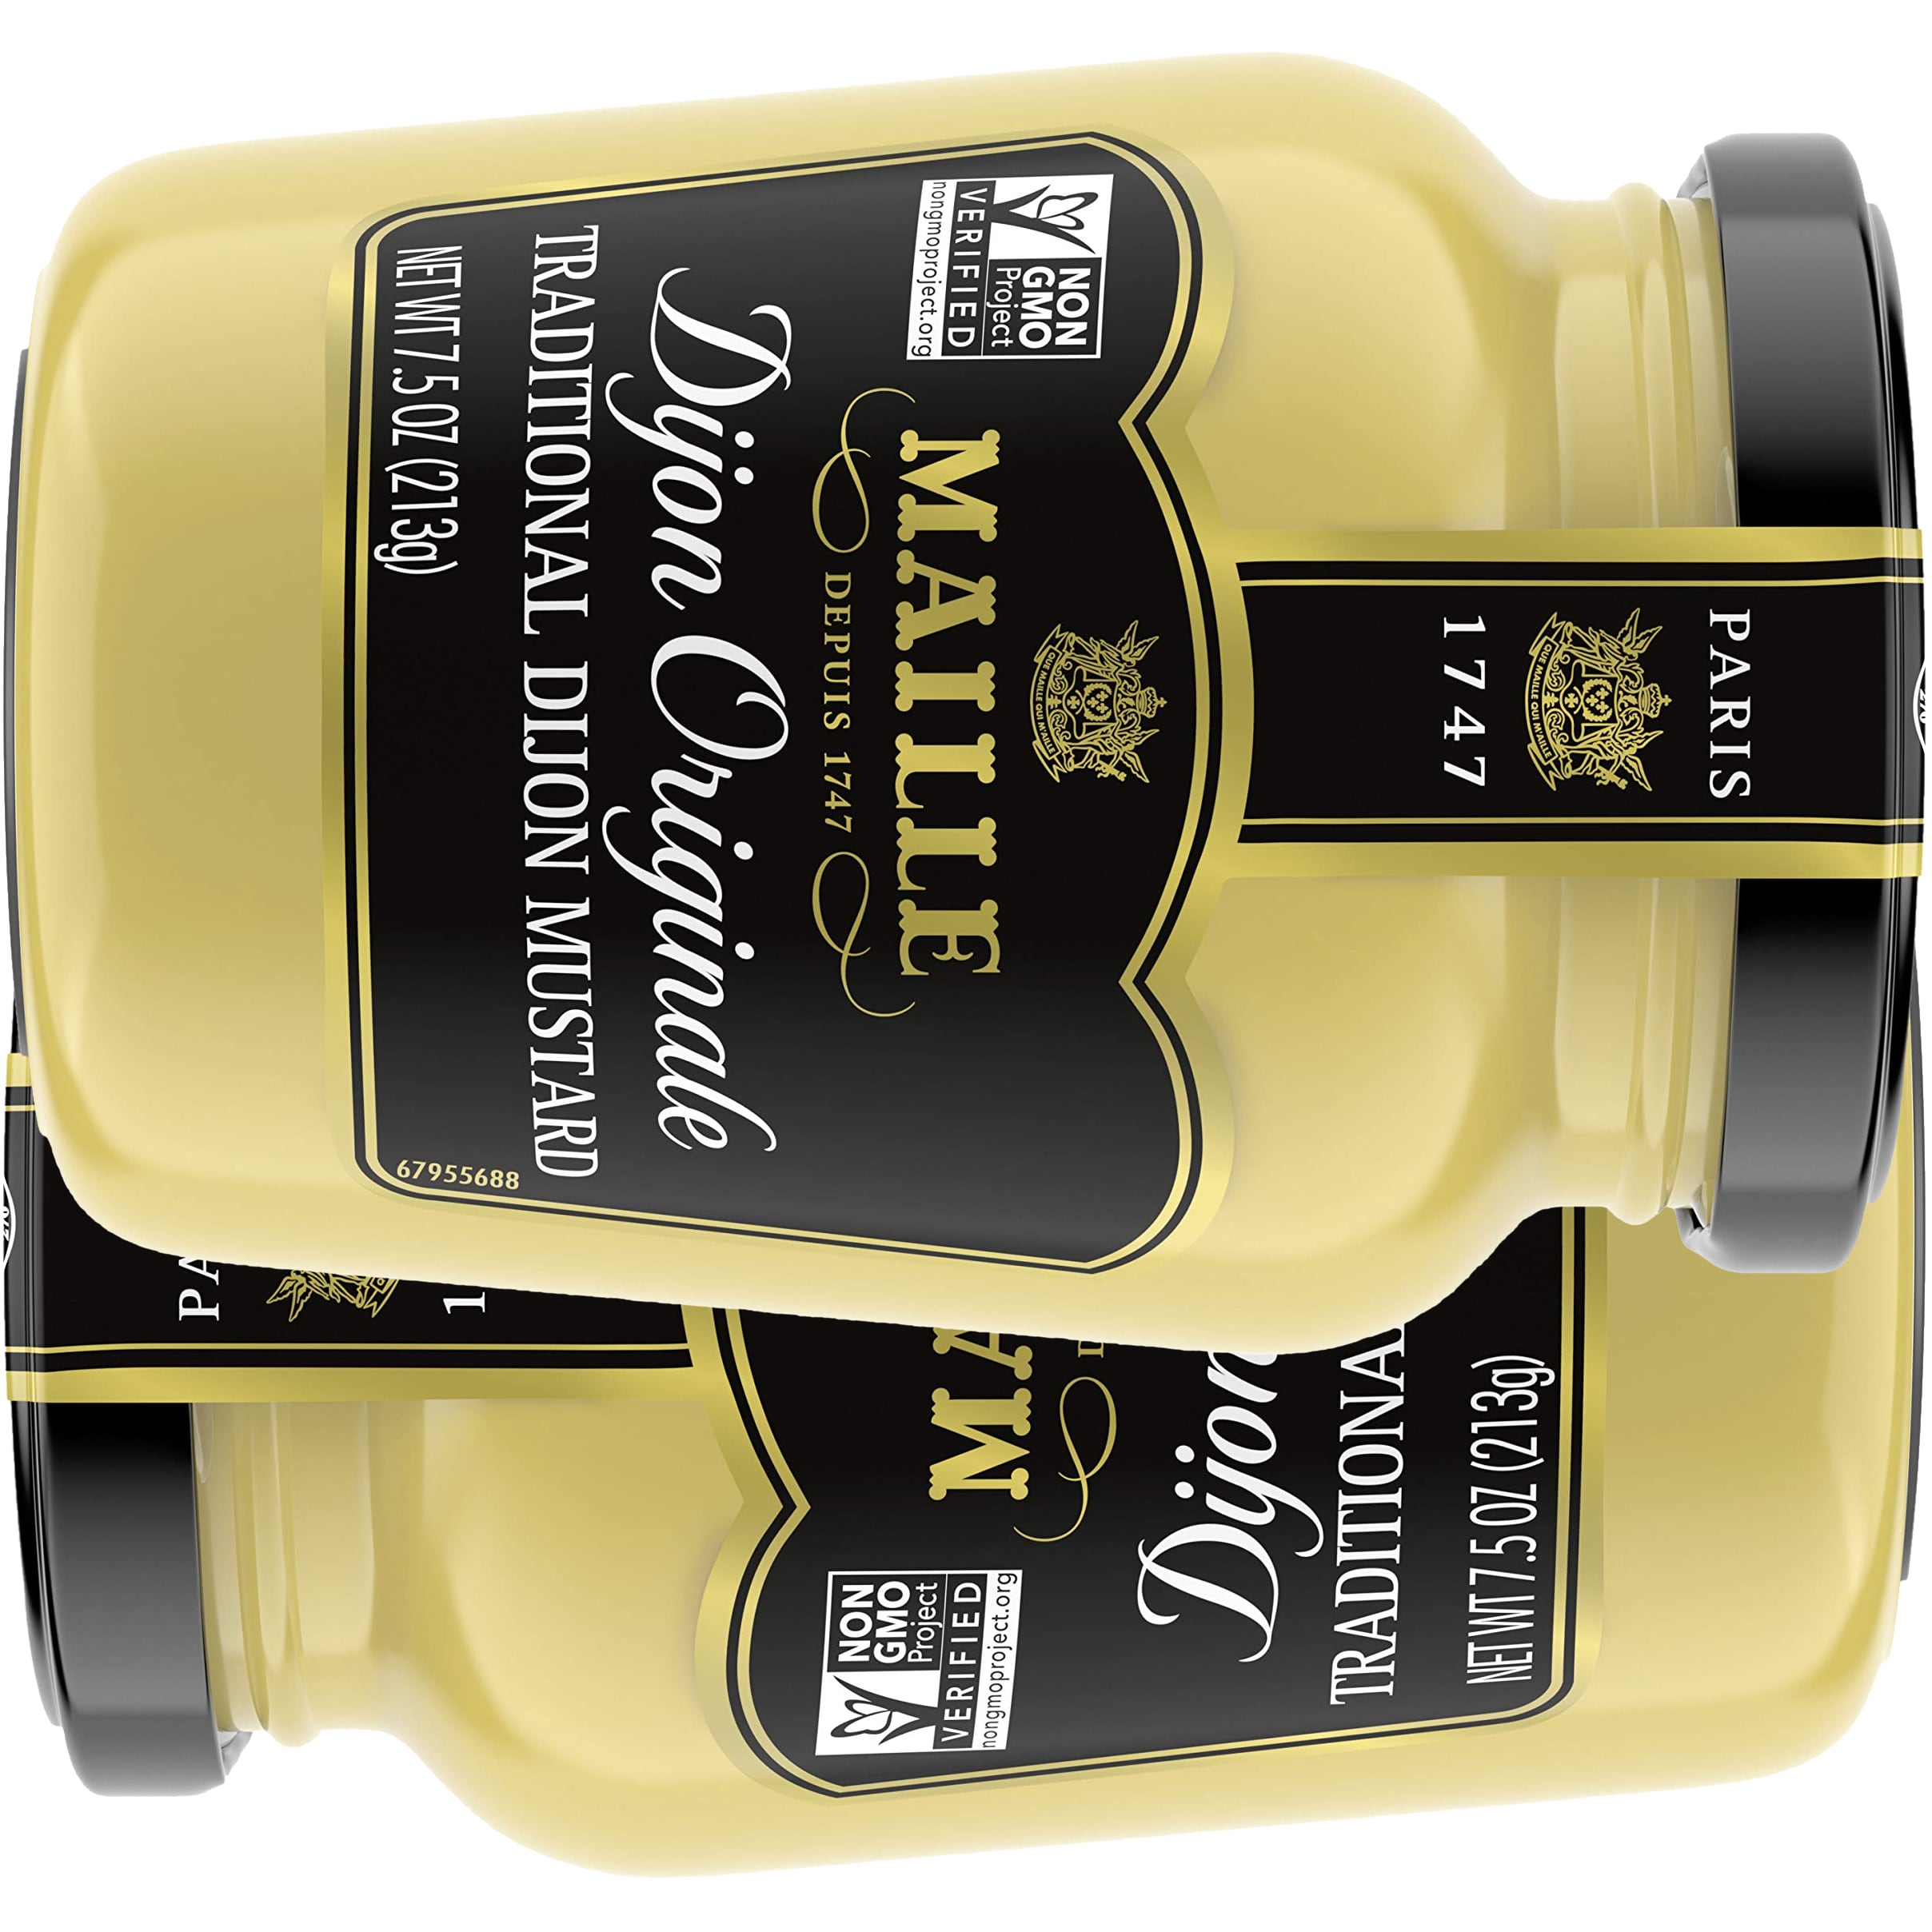 Free Maille Product Samples For Ambassadors